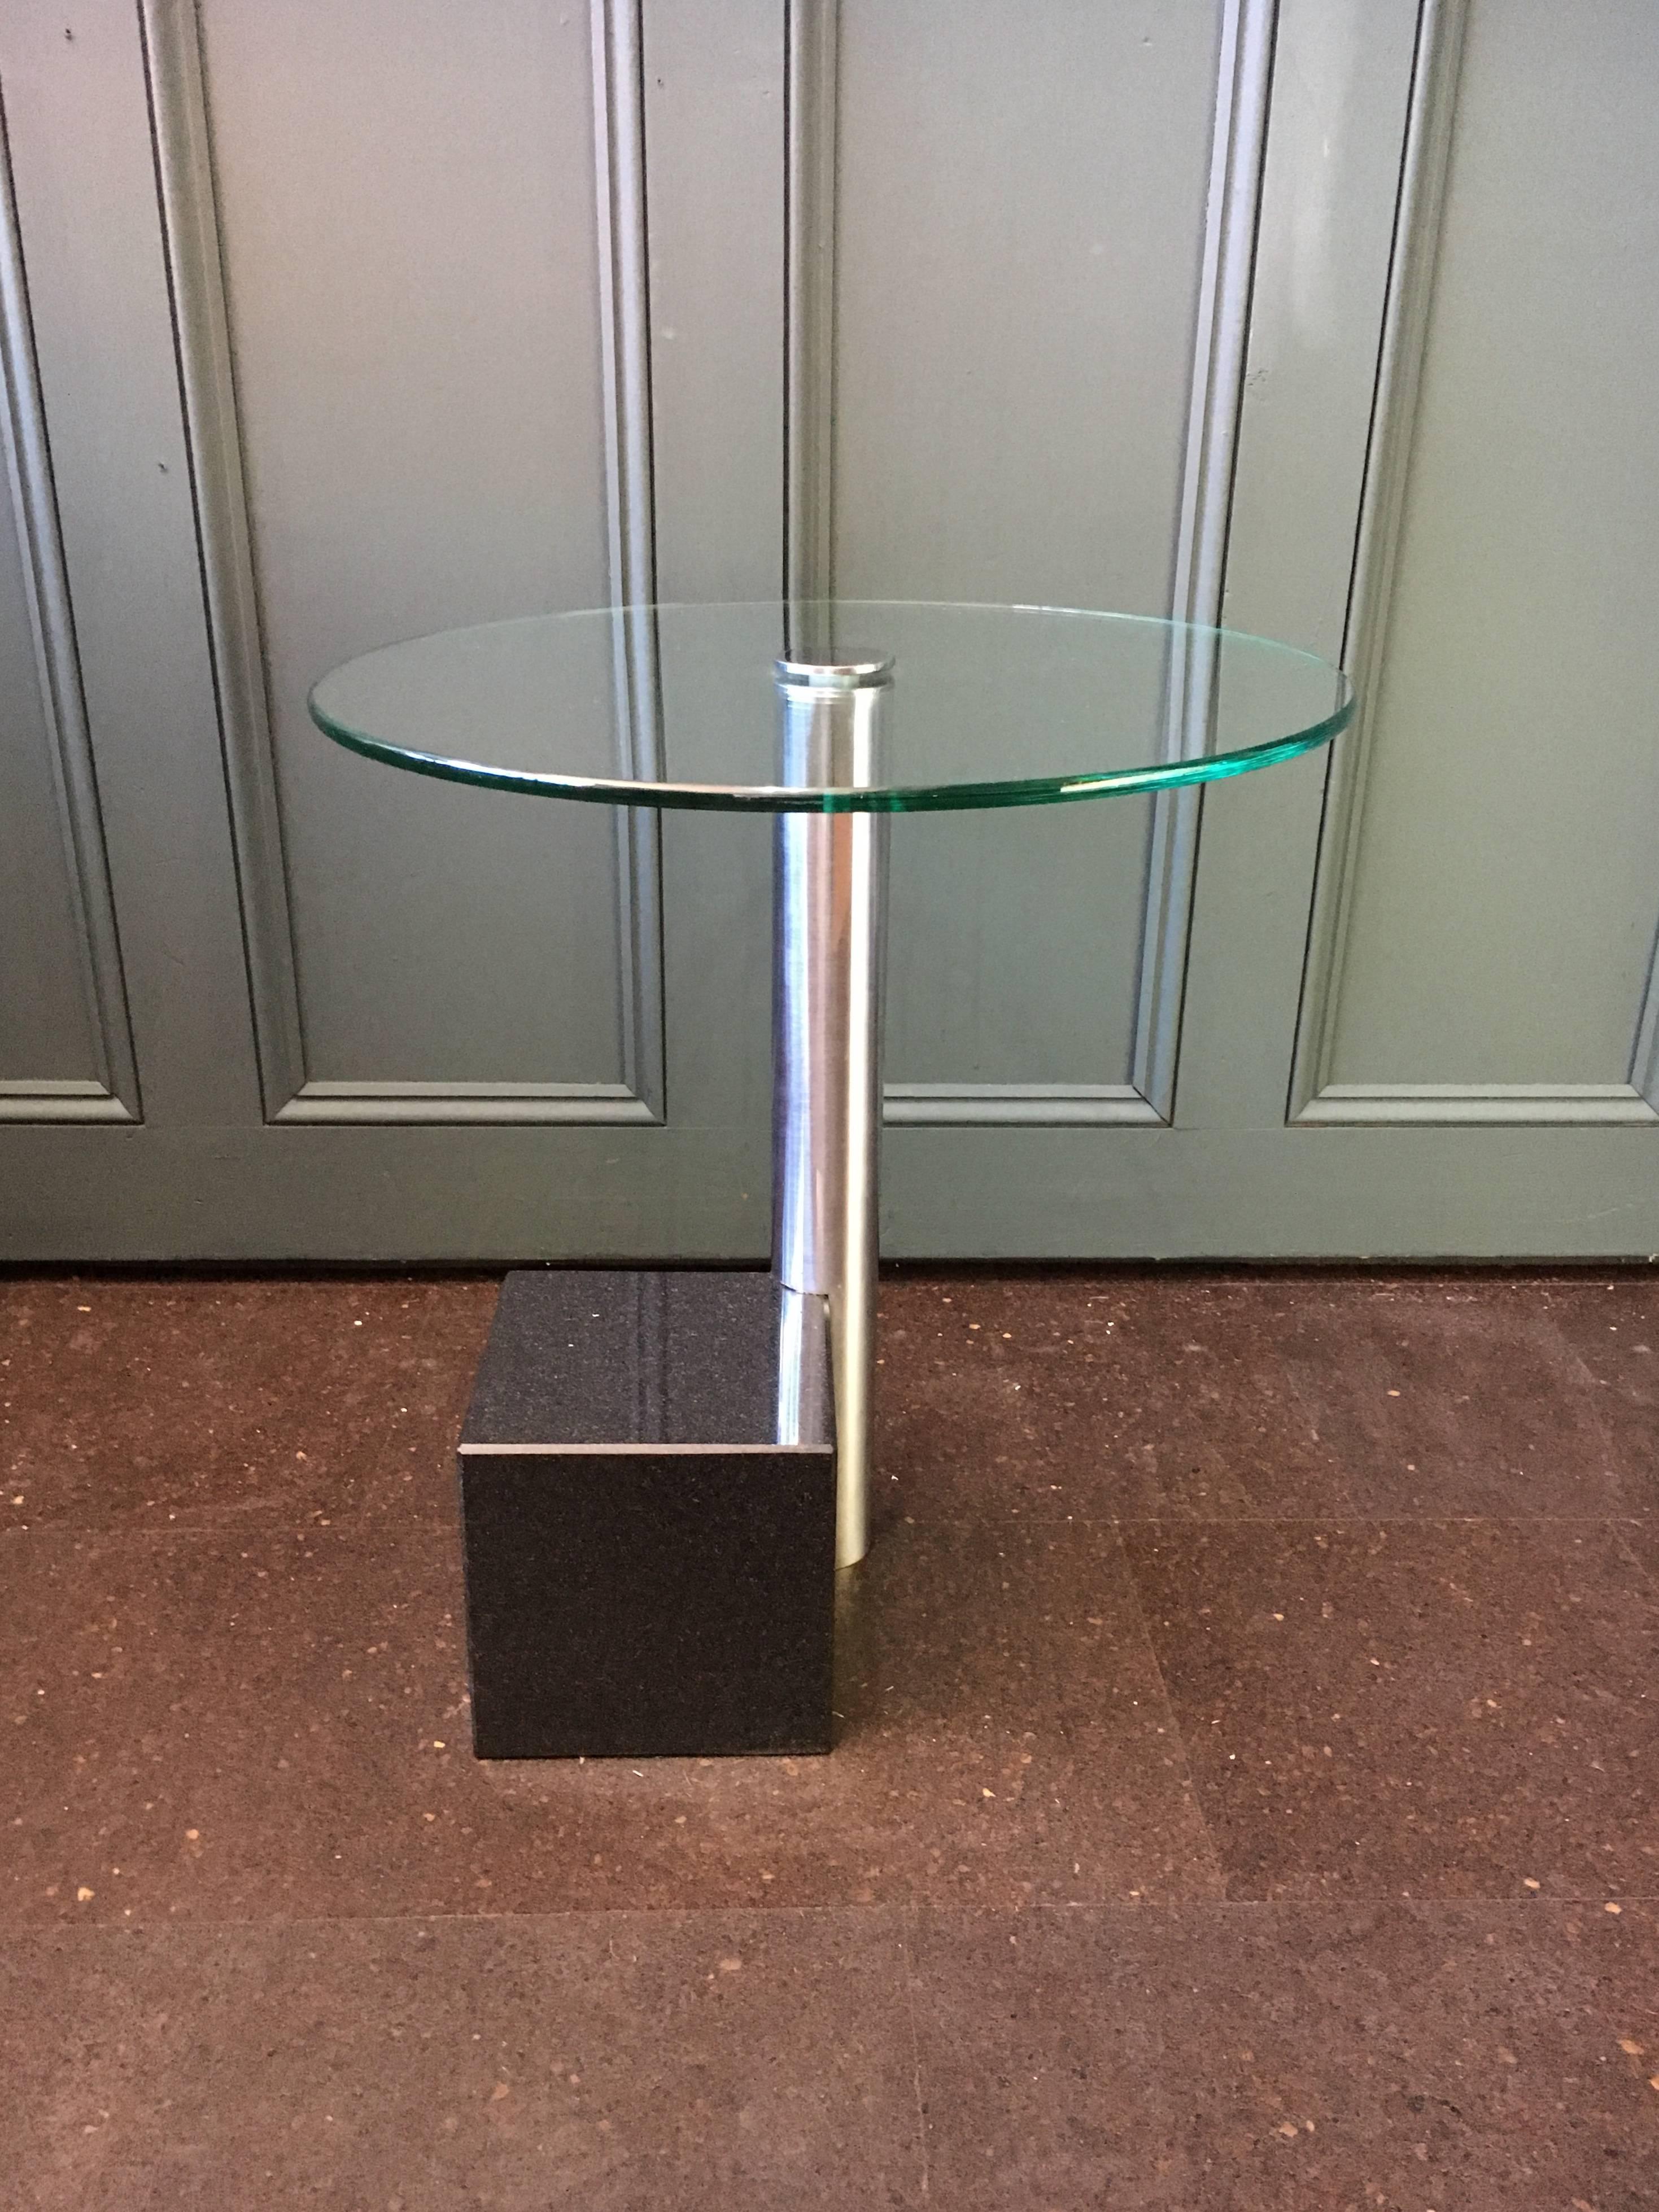 A Hank Kwint side table made in the 1980s, Glass circular top, chrome centre post with an offset solid cube of granite.
Superb minimalist design from Hank Kwint in the Netherlands.